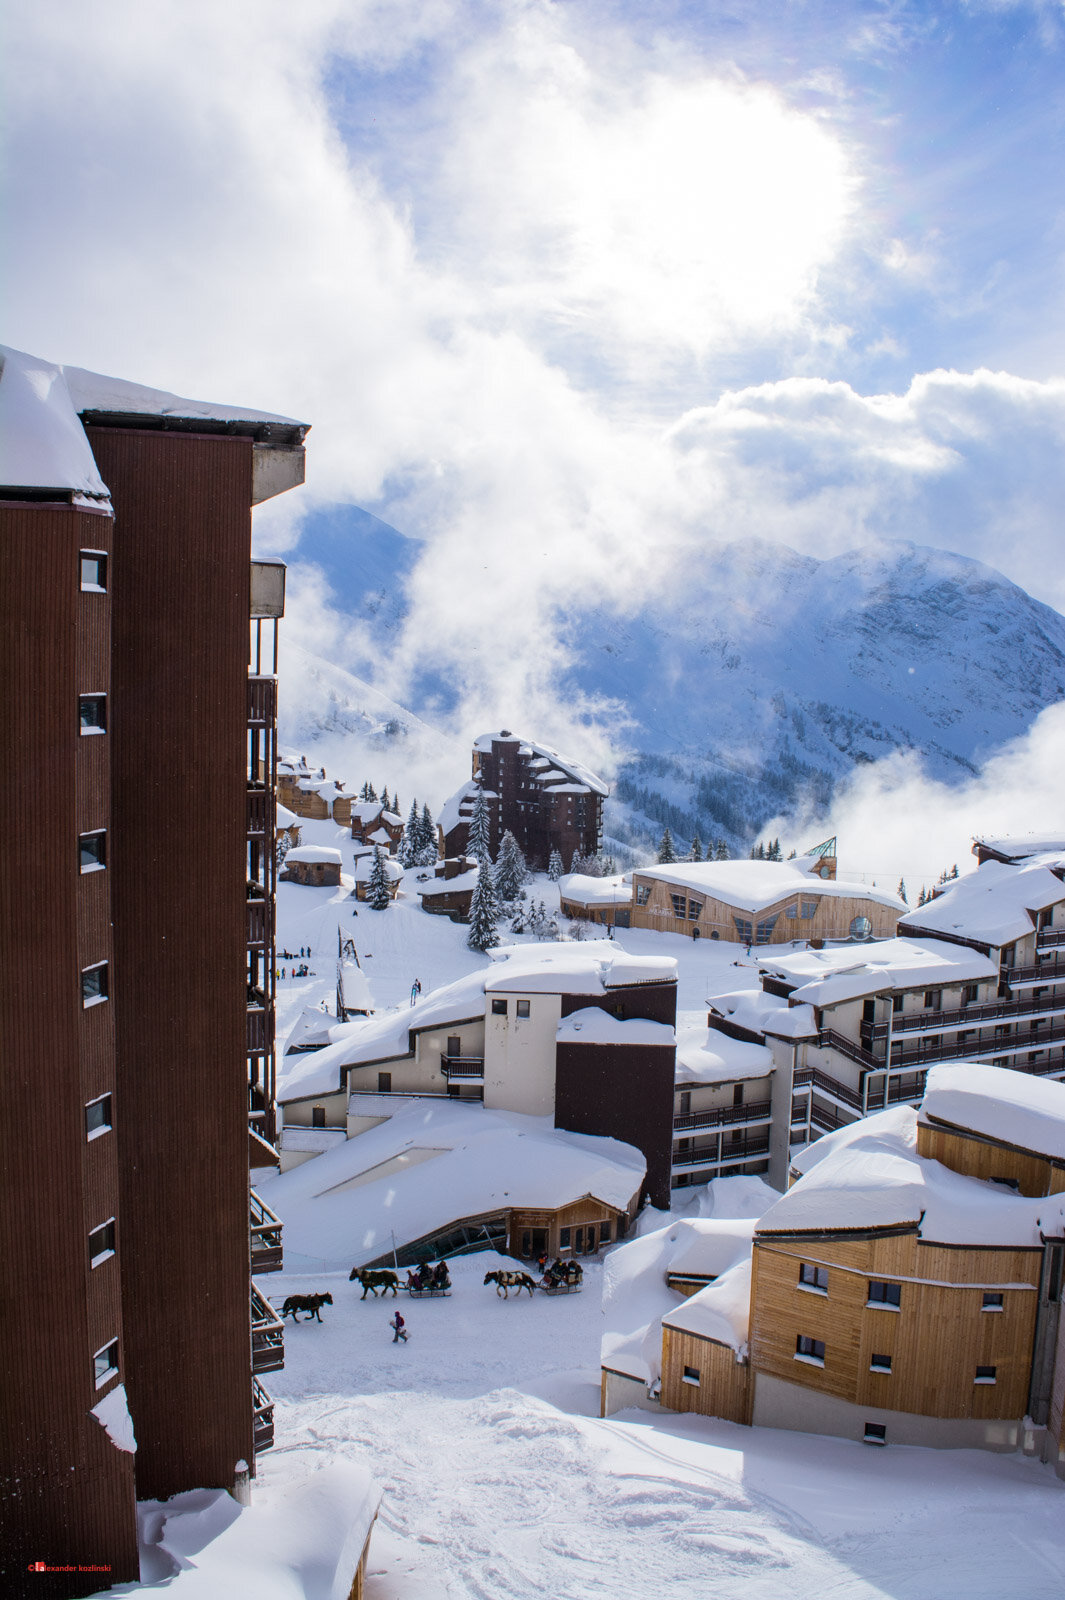 Clouds over Avoriaz